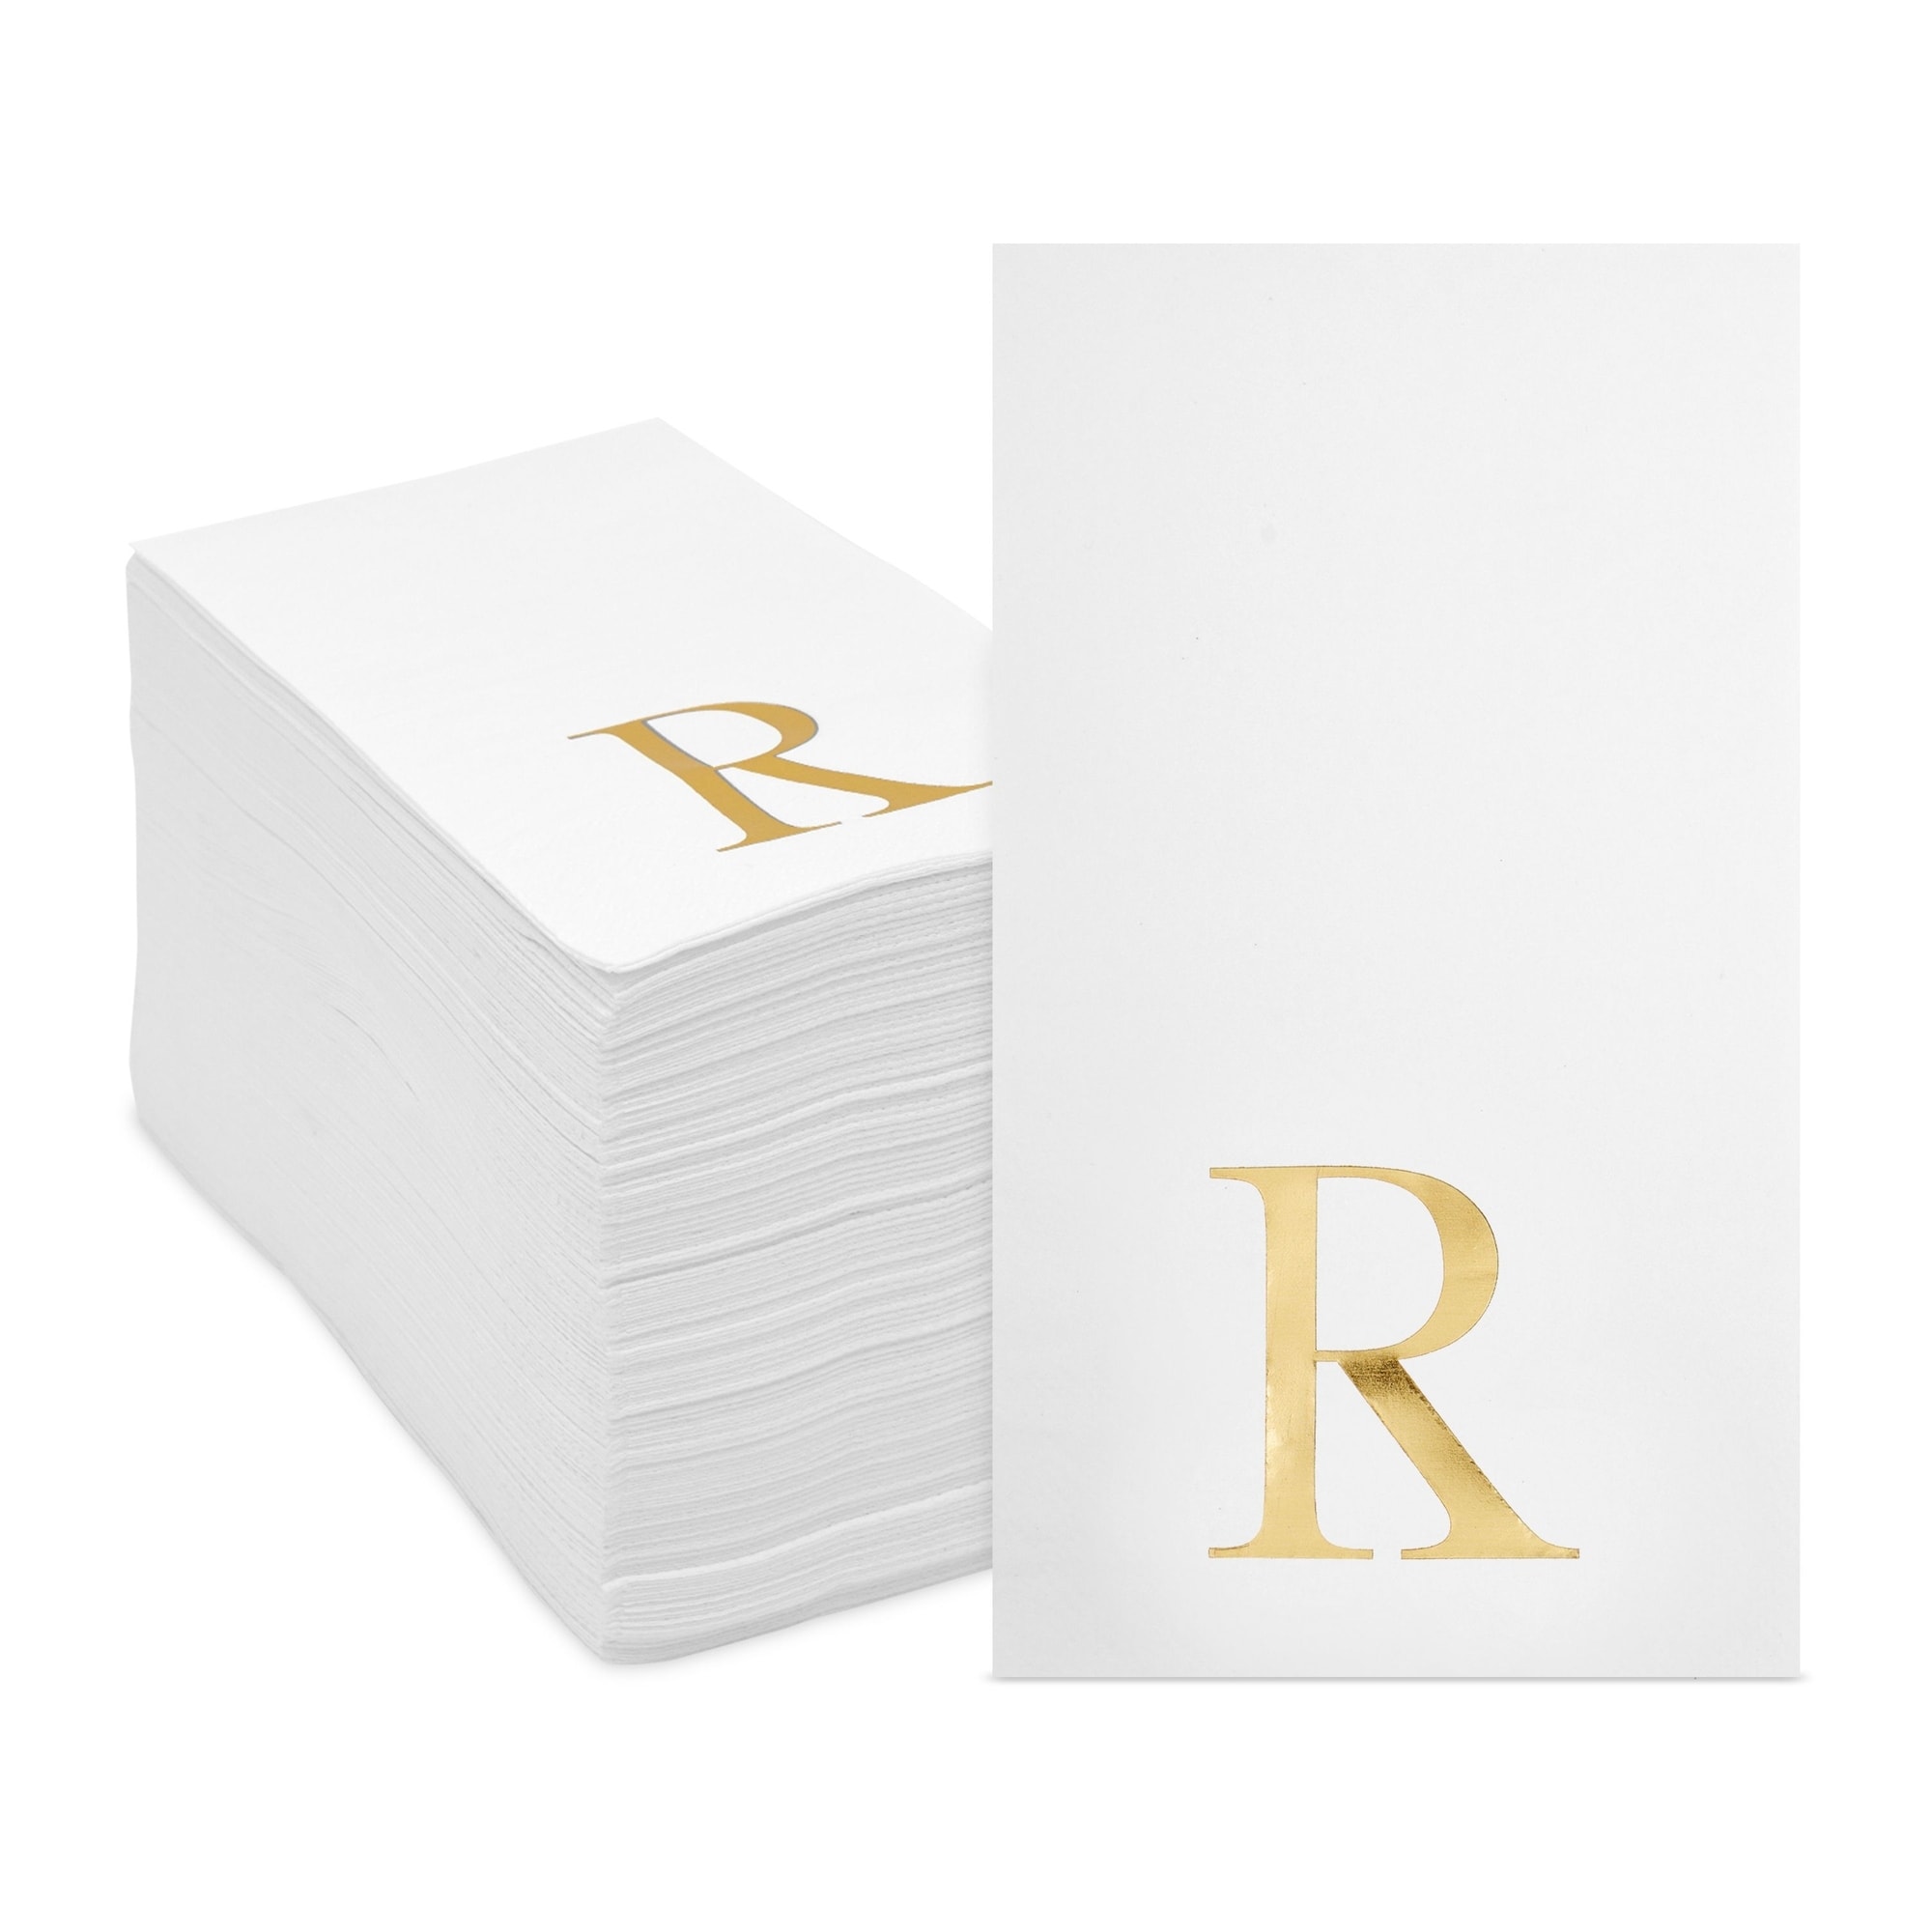 https://ak1.ostkcdn.com/images/products/is/images/direct/cf285826ef132f23a03cb401bbd67a0ba66f84f0/100-Pack-Gold-Foil-Initial-Letter-R-White-Monogrammed-Paper-Napkins-for-Wedding-Reception-%284.25-x-7.75-In%29.jpg